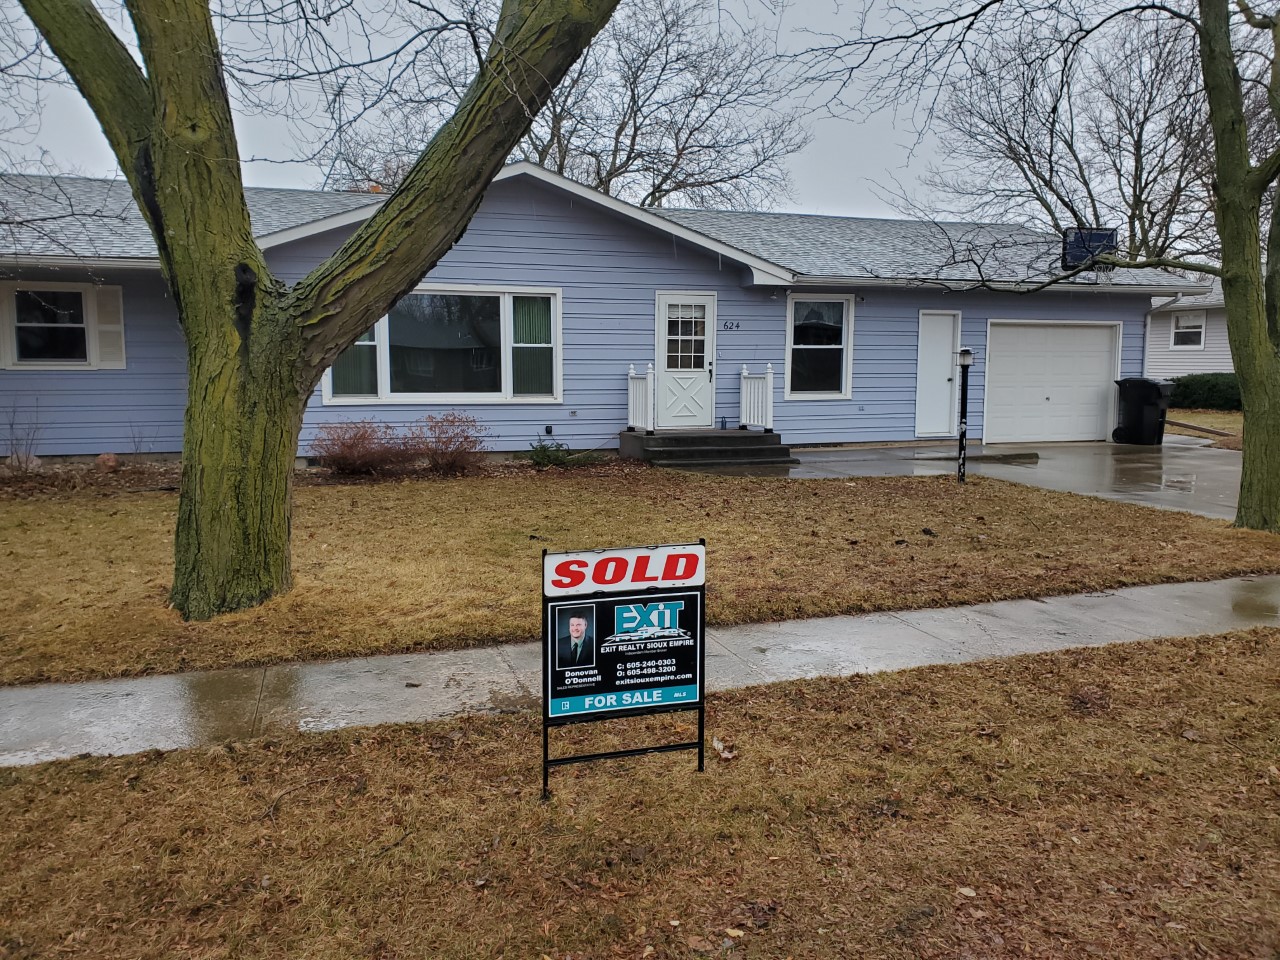 624 Wipf St. Freeman, SD is now SOLD by Donovan O'Donnell